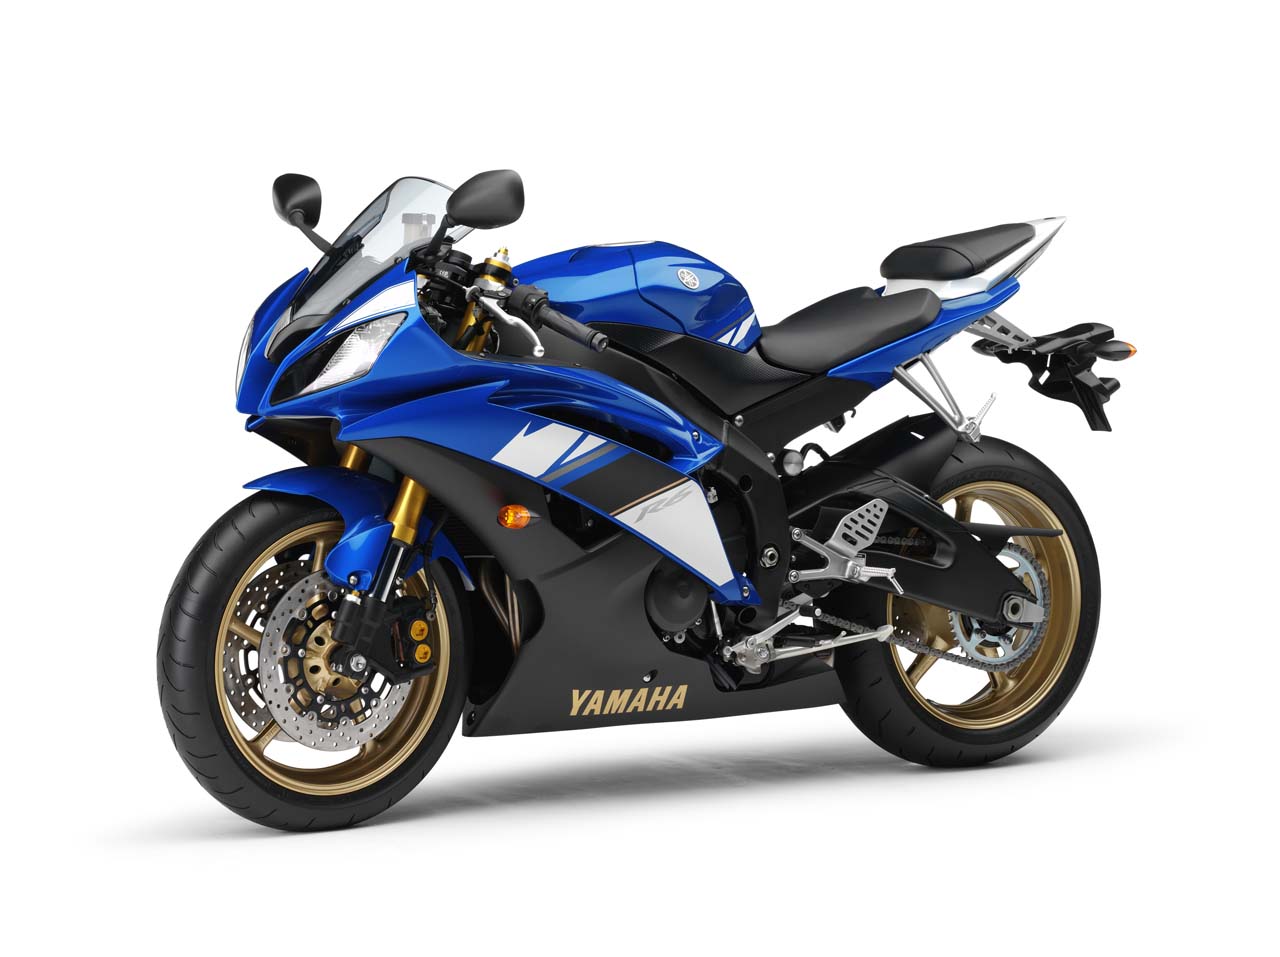 Auto Review: Yamaha r6